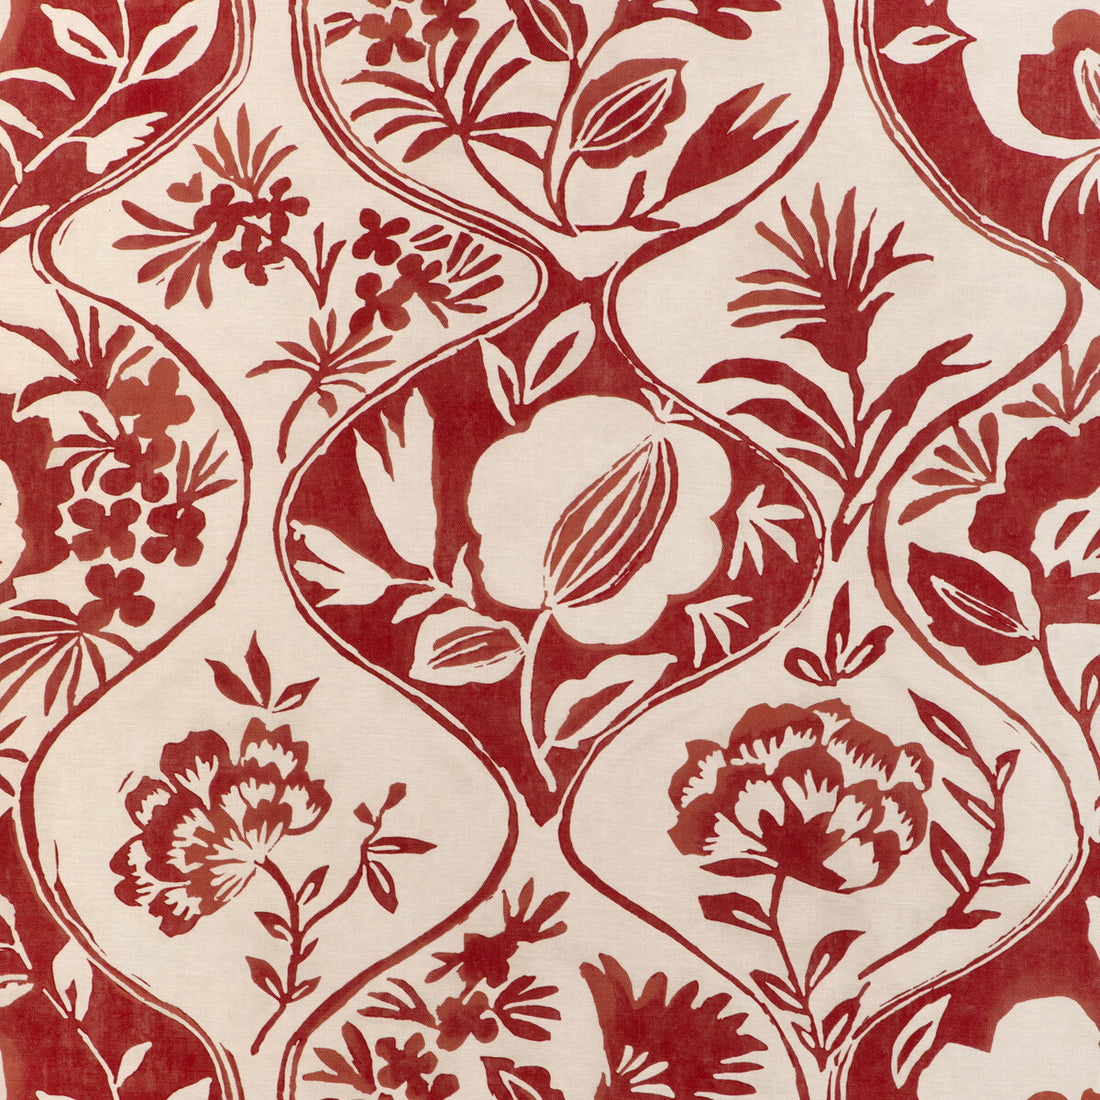 Calathea Print fabric in red color - pattern 2023141.19.0 - by Lee Jofa in the Garden Walk collection